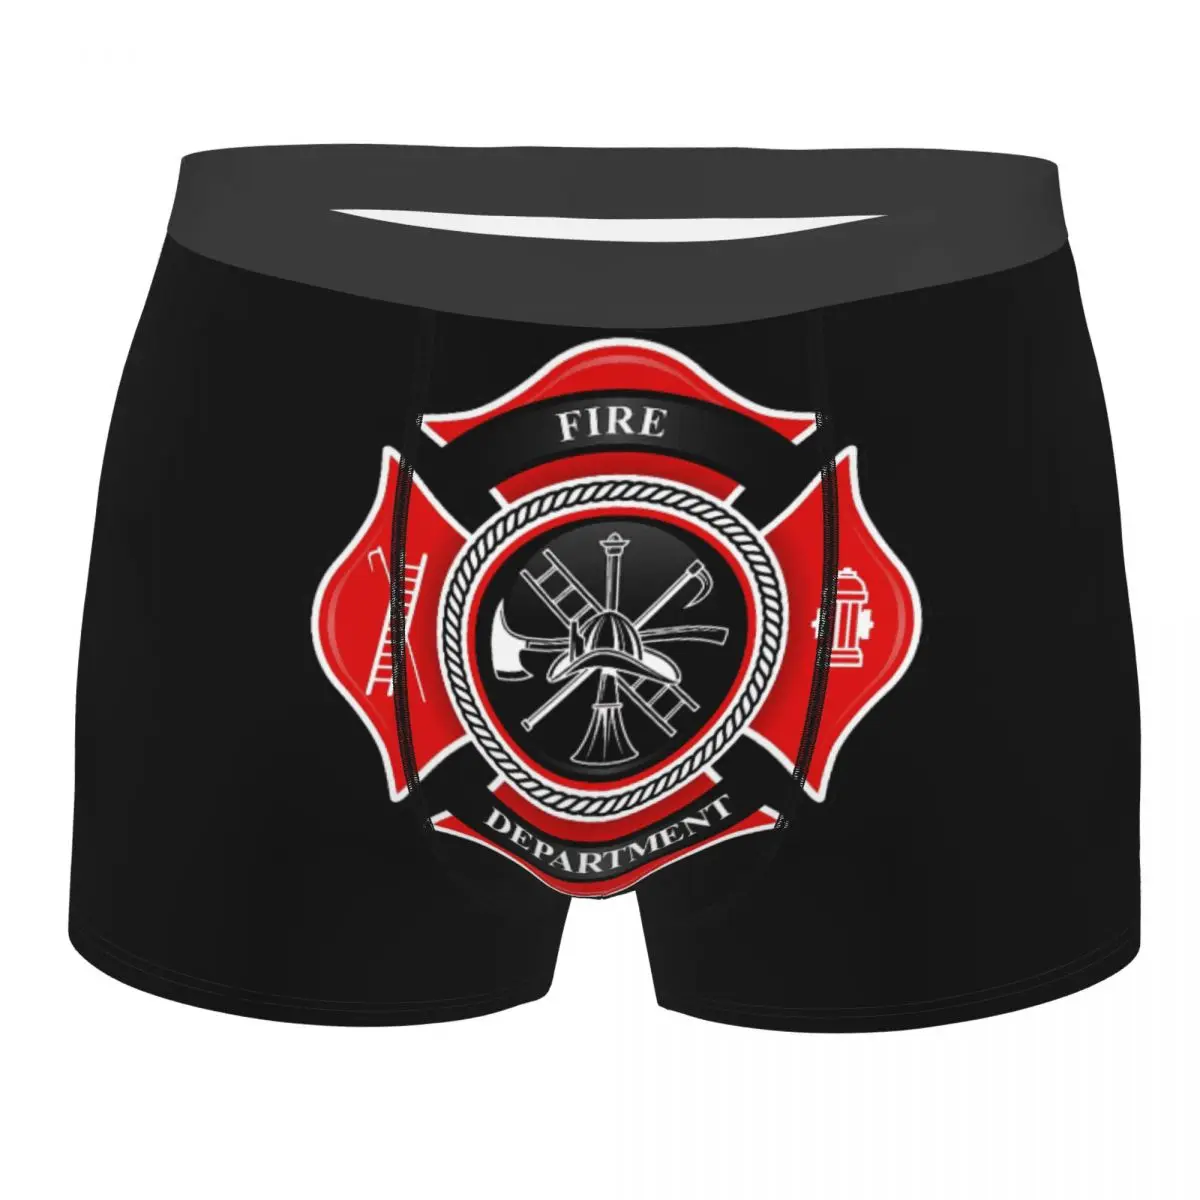 Fire Department Badge firefighter Men's Boxer Briefs special Highly Breathable Underpants High Quality 3D Print Shorts dog fire pitbull from hell underpants breathbale panties male underwear print shorts boxer briefs